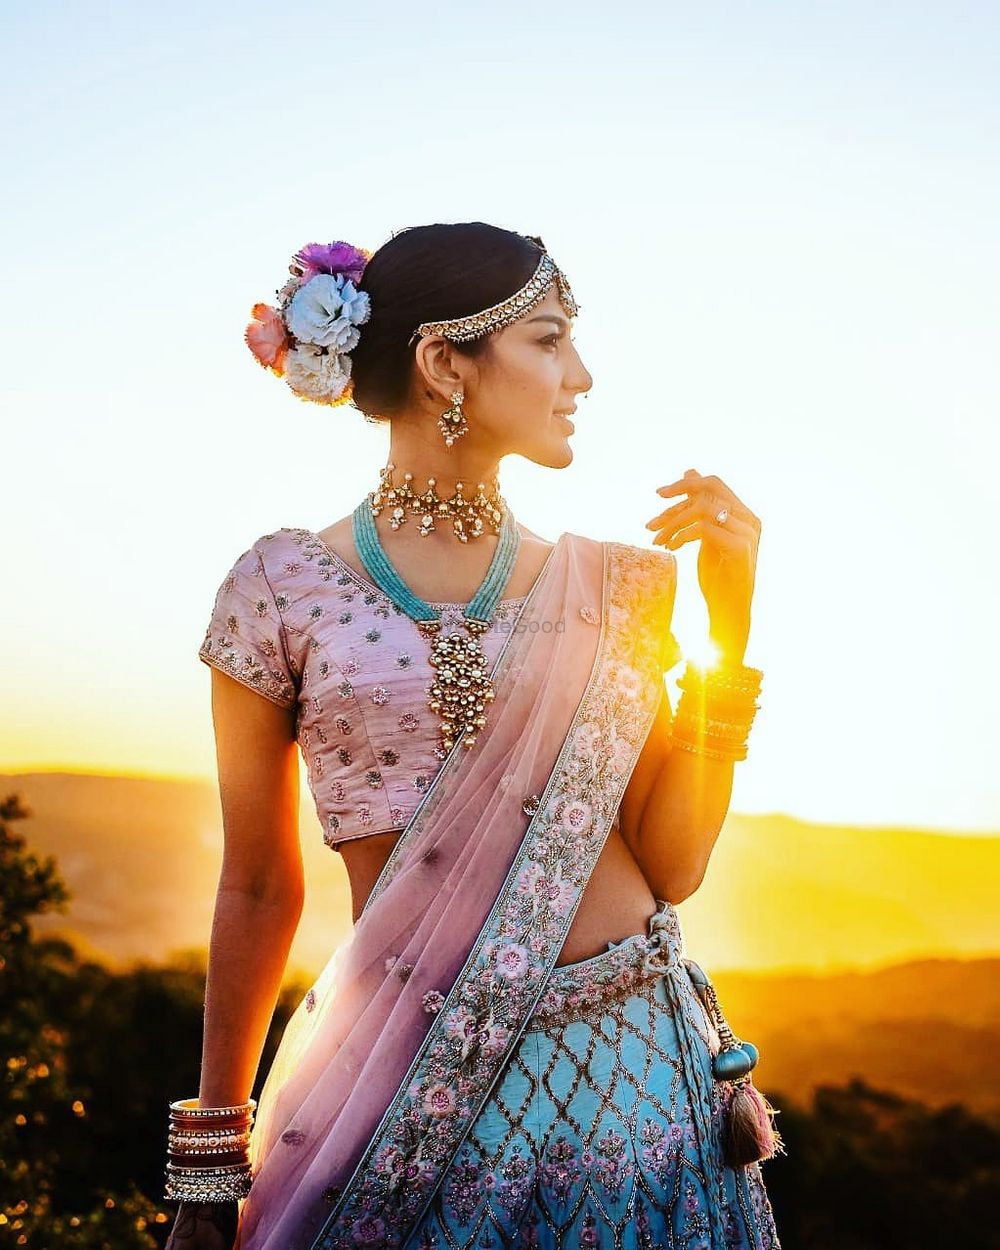 Photo of Candid shot of a bride dressed in a pink and blue lehenga.